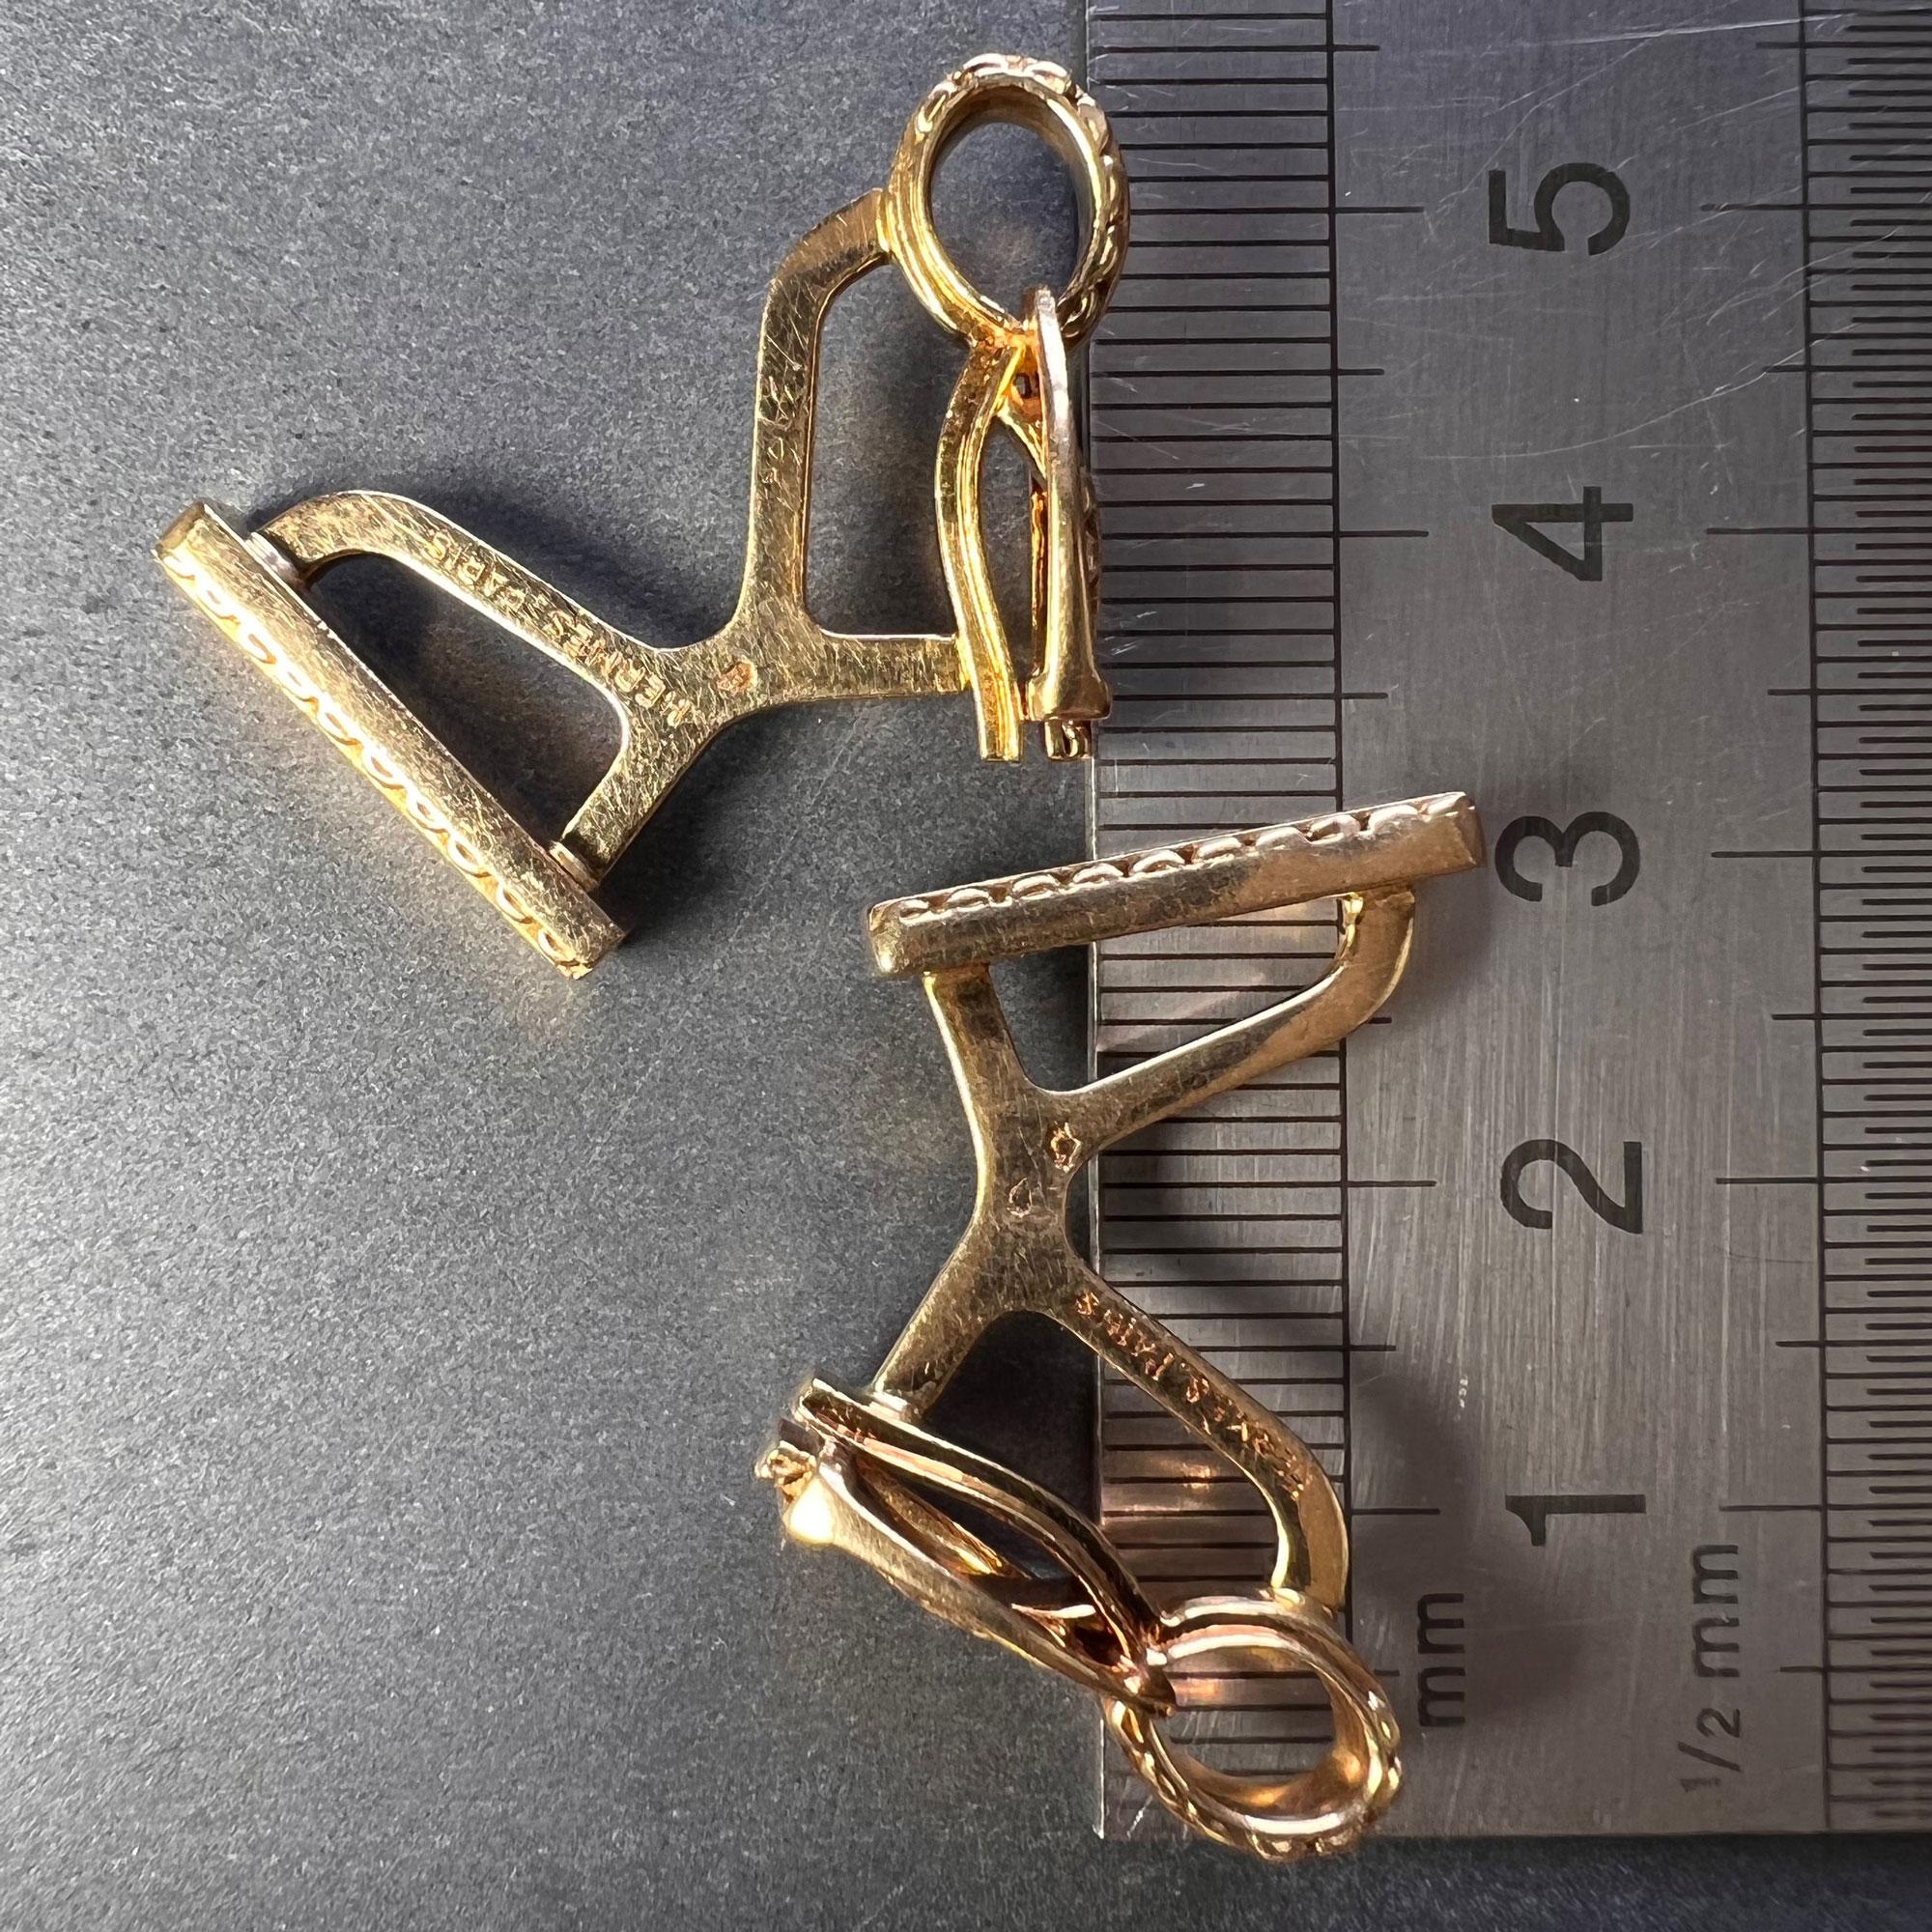 Hermes Paris French Stirrup 18K Yellow Gold Cufflinks For Sale 5